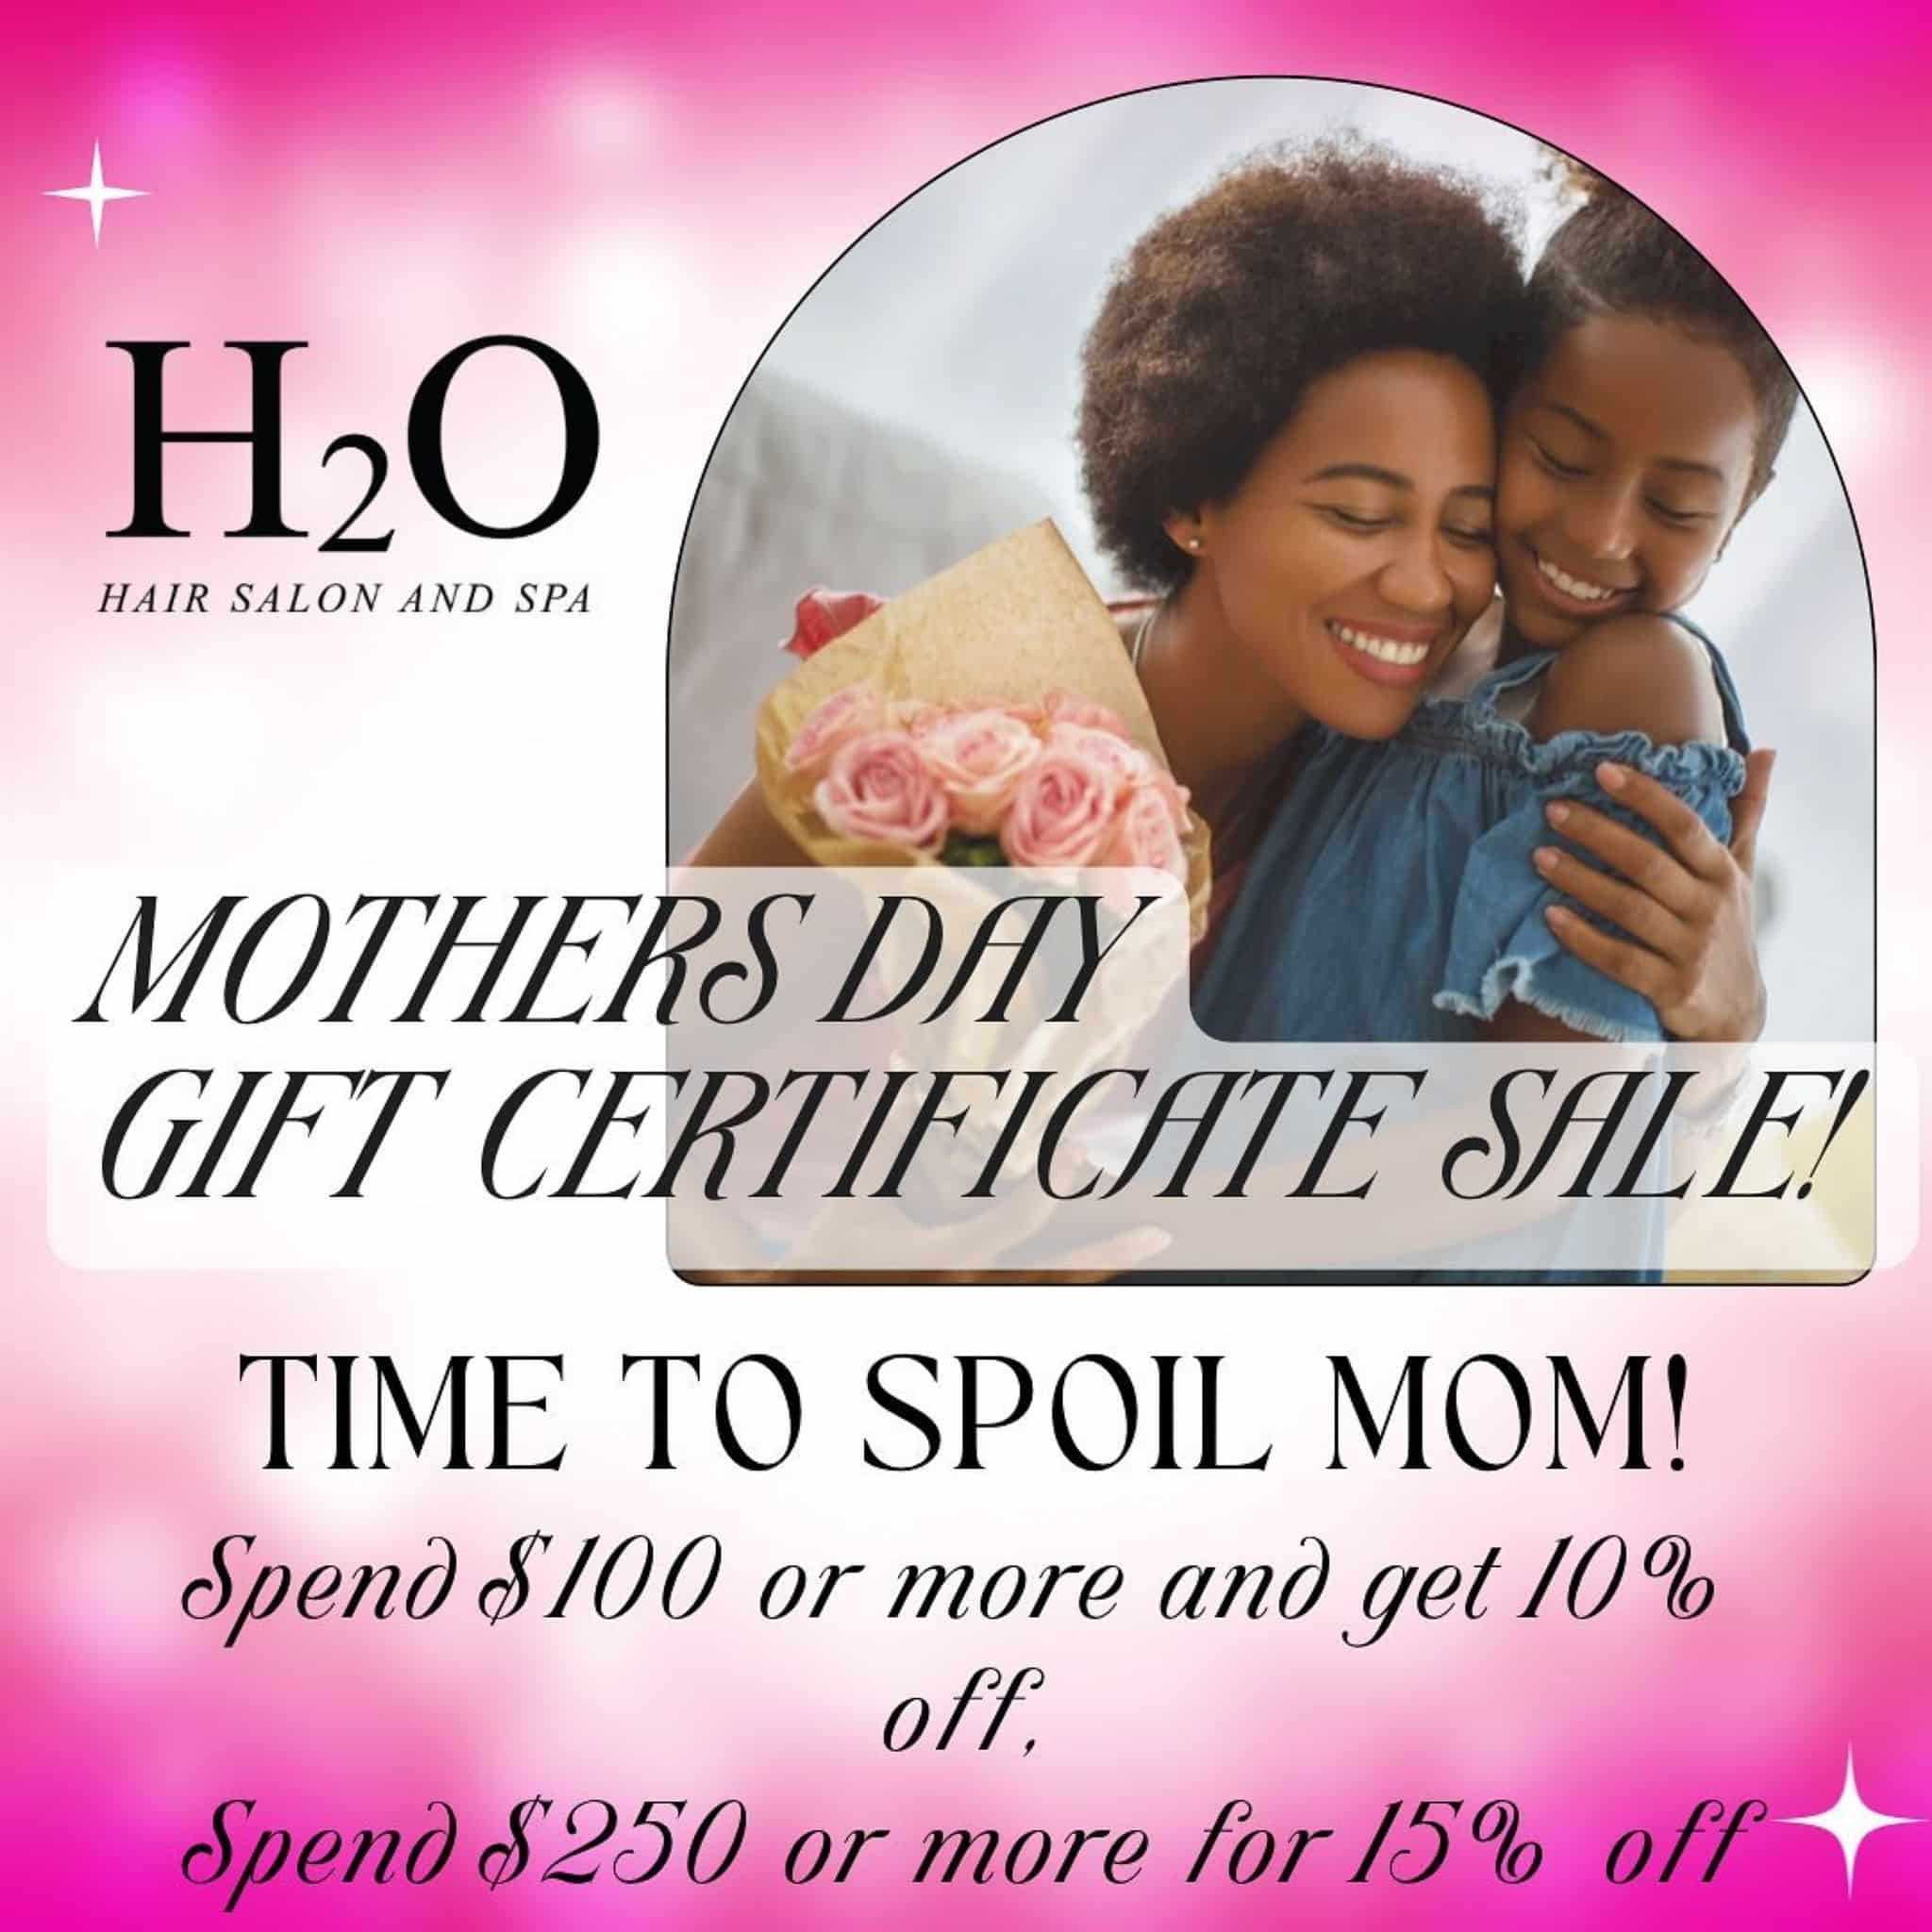 Mother's day gift certificate sale